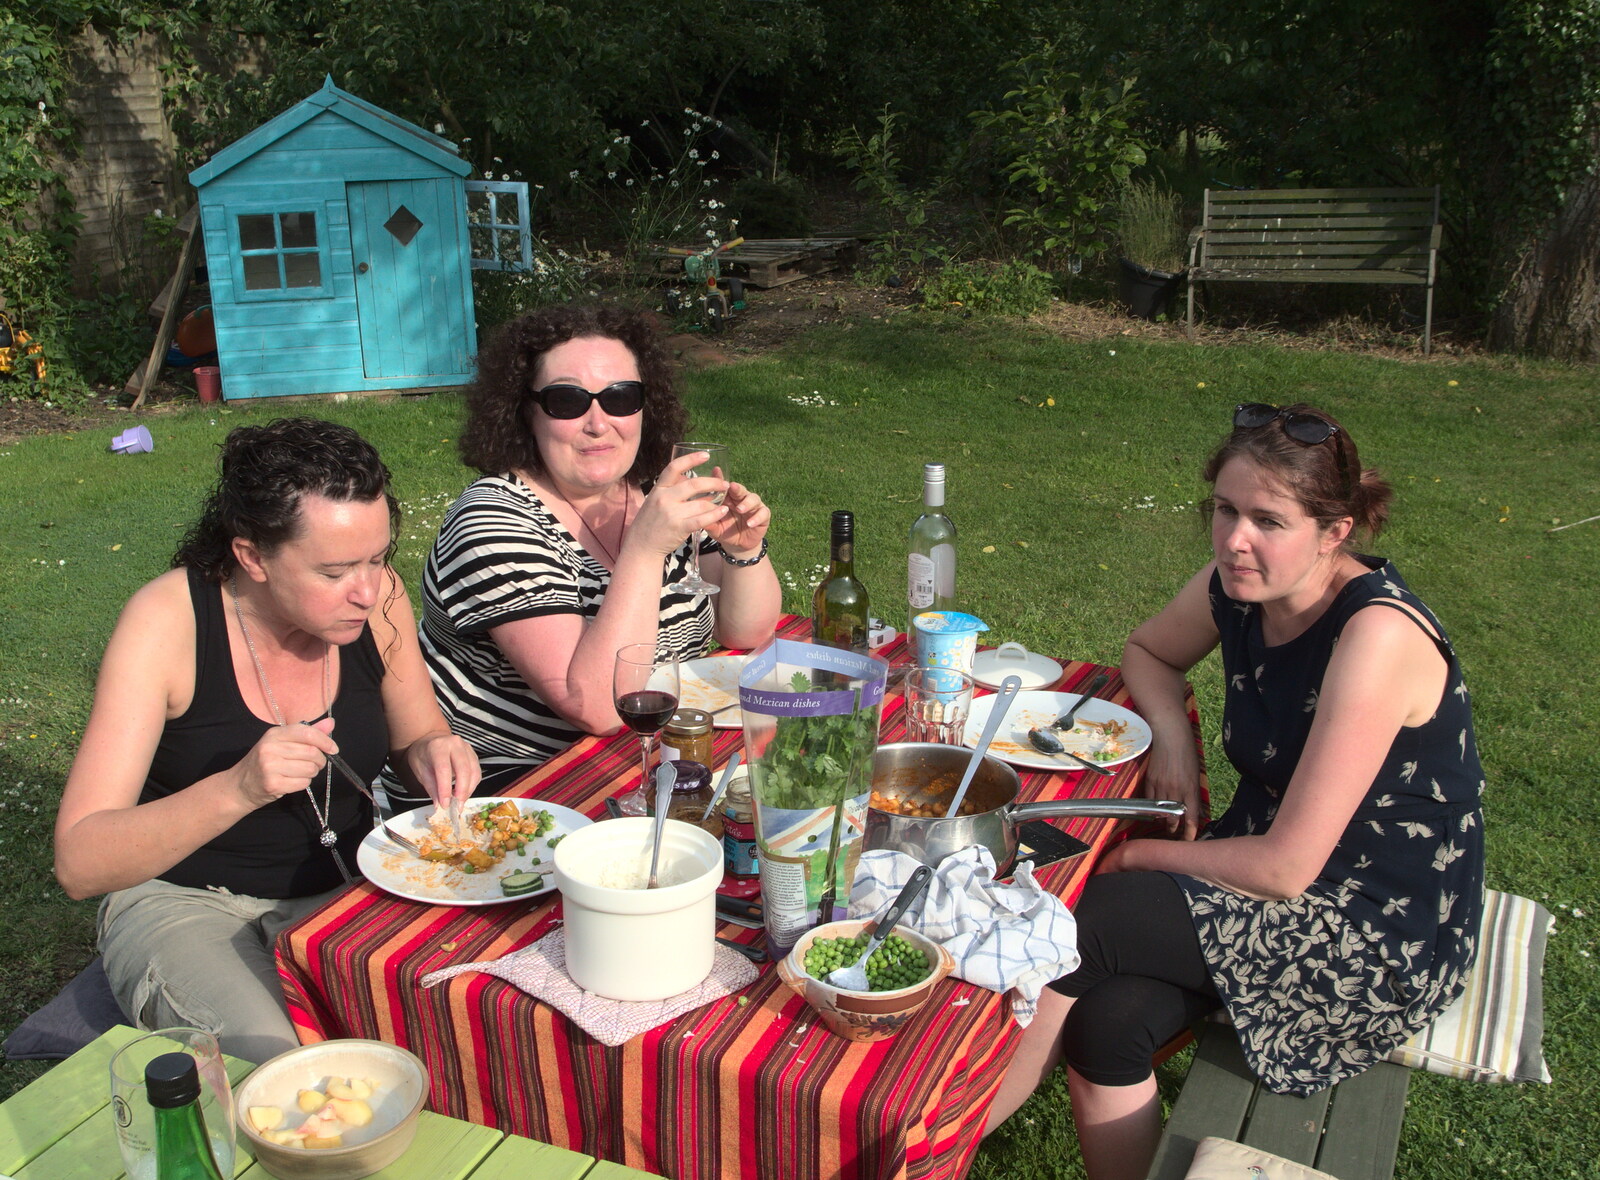 Evelyn, Louise and Isobel from A visit from Da Gorls, Brome, Suffolk - 27th June 2015